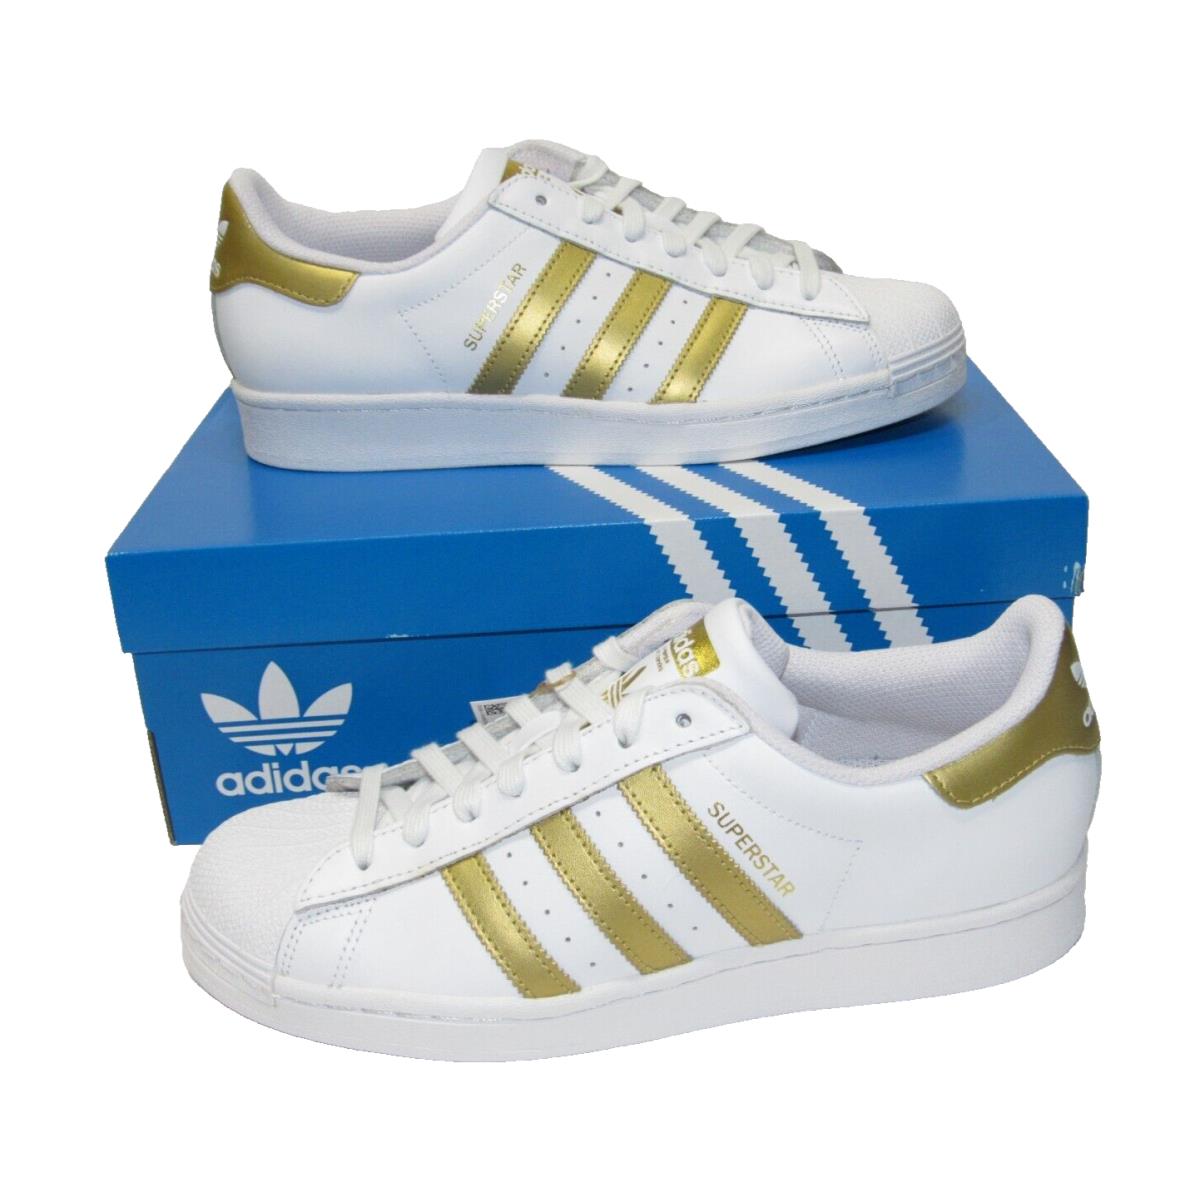 Adidas Superstar White/gold Leather Athletic Training Shoes FX7483 Womens sz 8.5